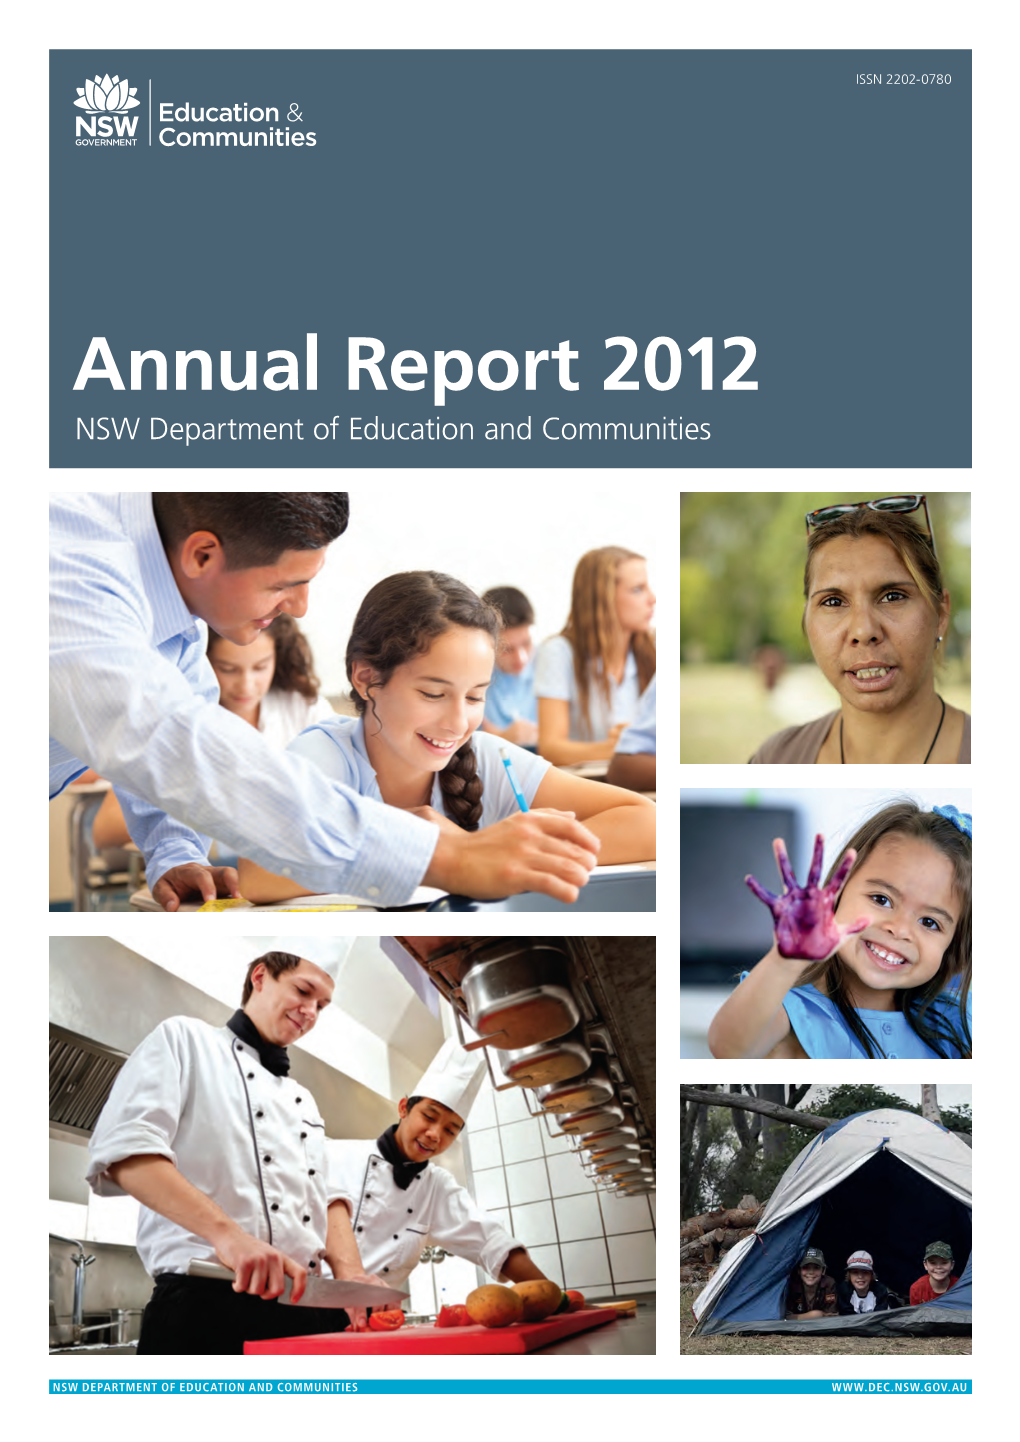 Annual Report 2012 NSW Department of Education and Communities